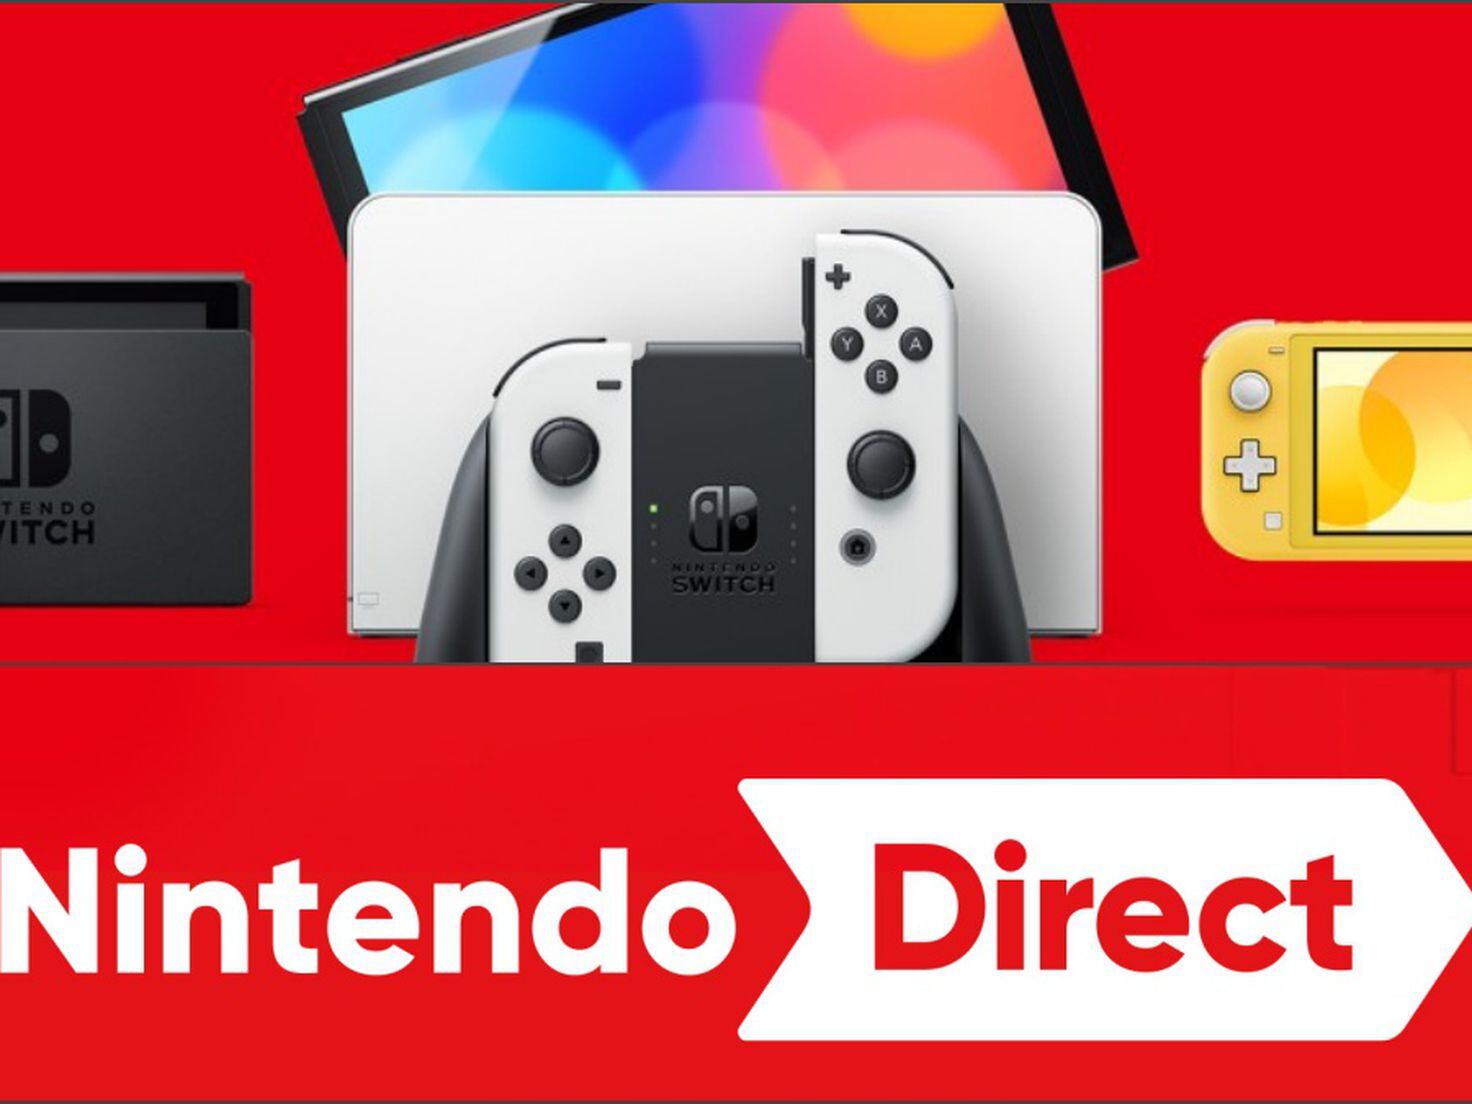 New Nintendo Direct announced: How to watch, date, time and what